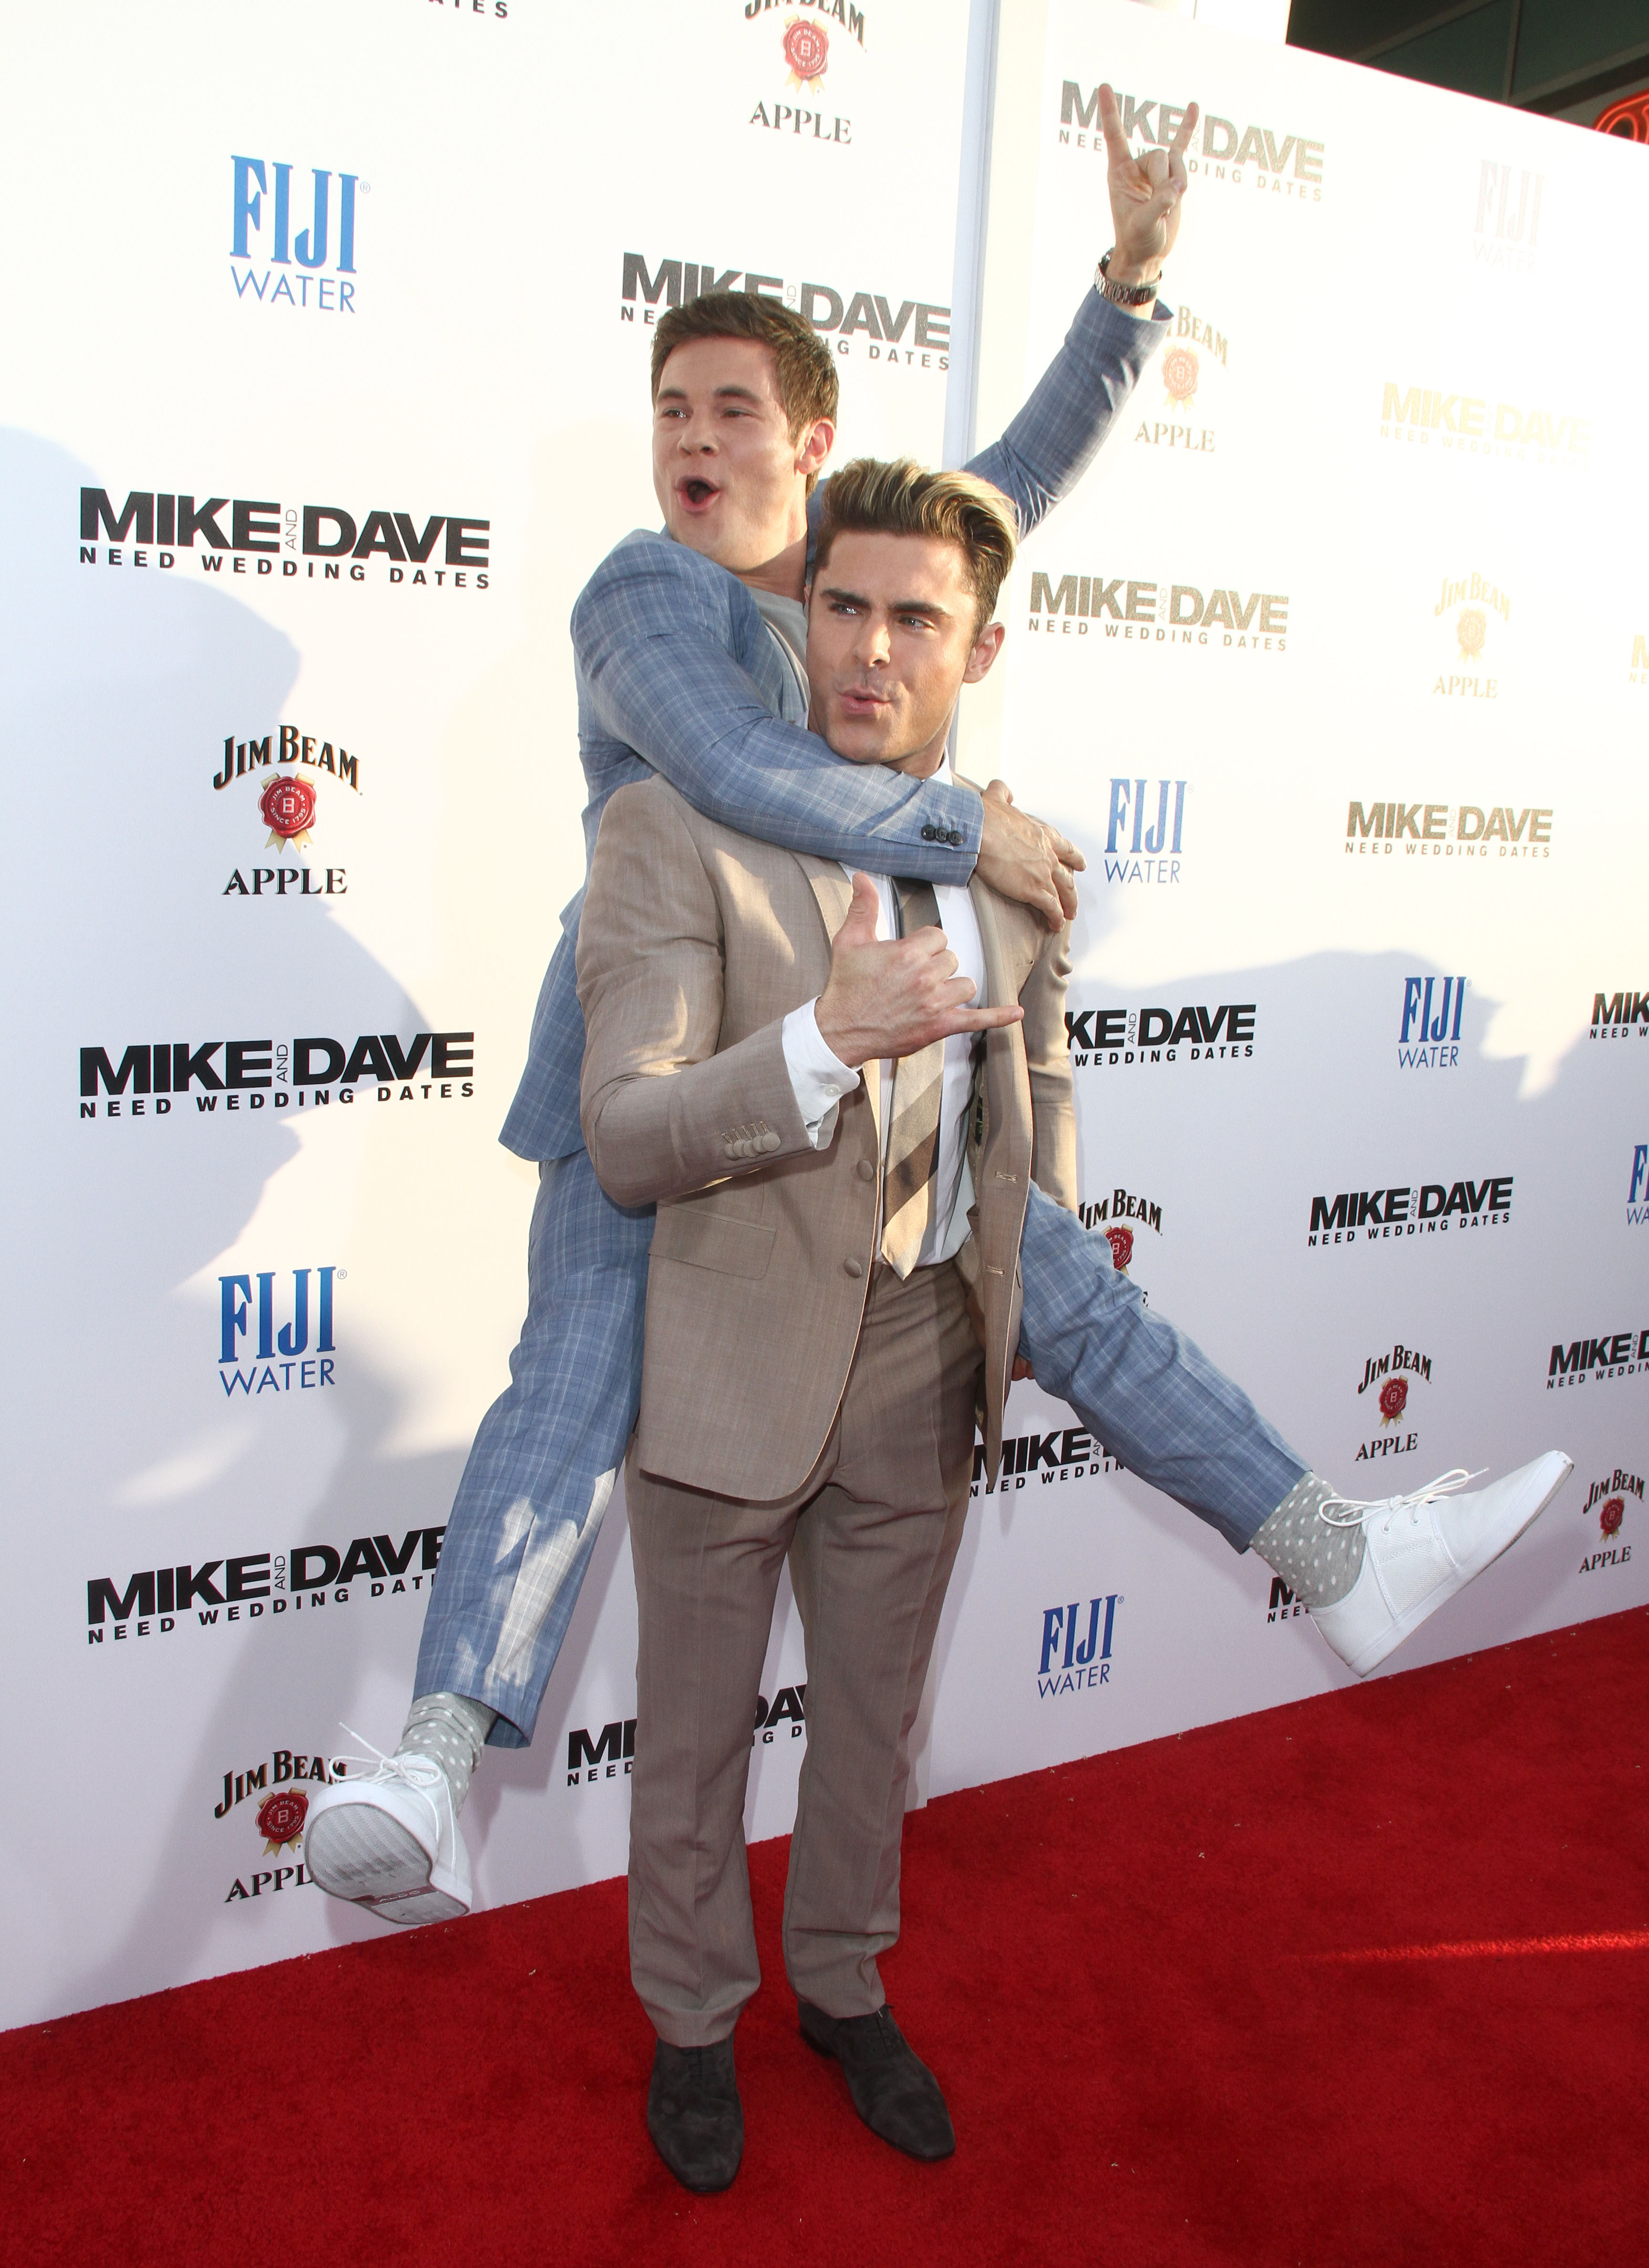 Energetically Played: Zac Efron and Adam Devine at the Premiere of Mike and Dave Need Wedding Dates